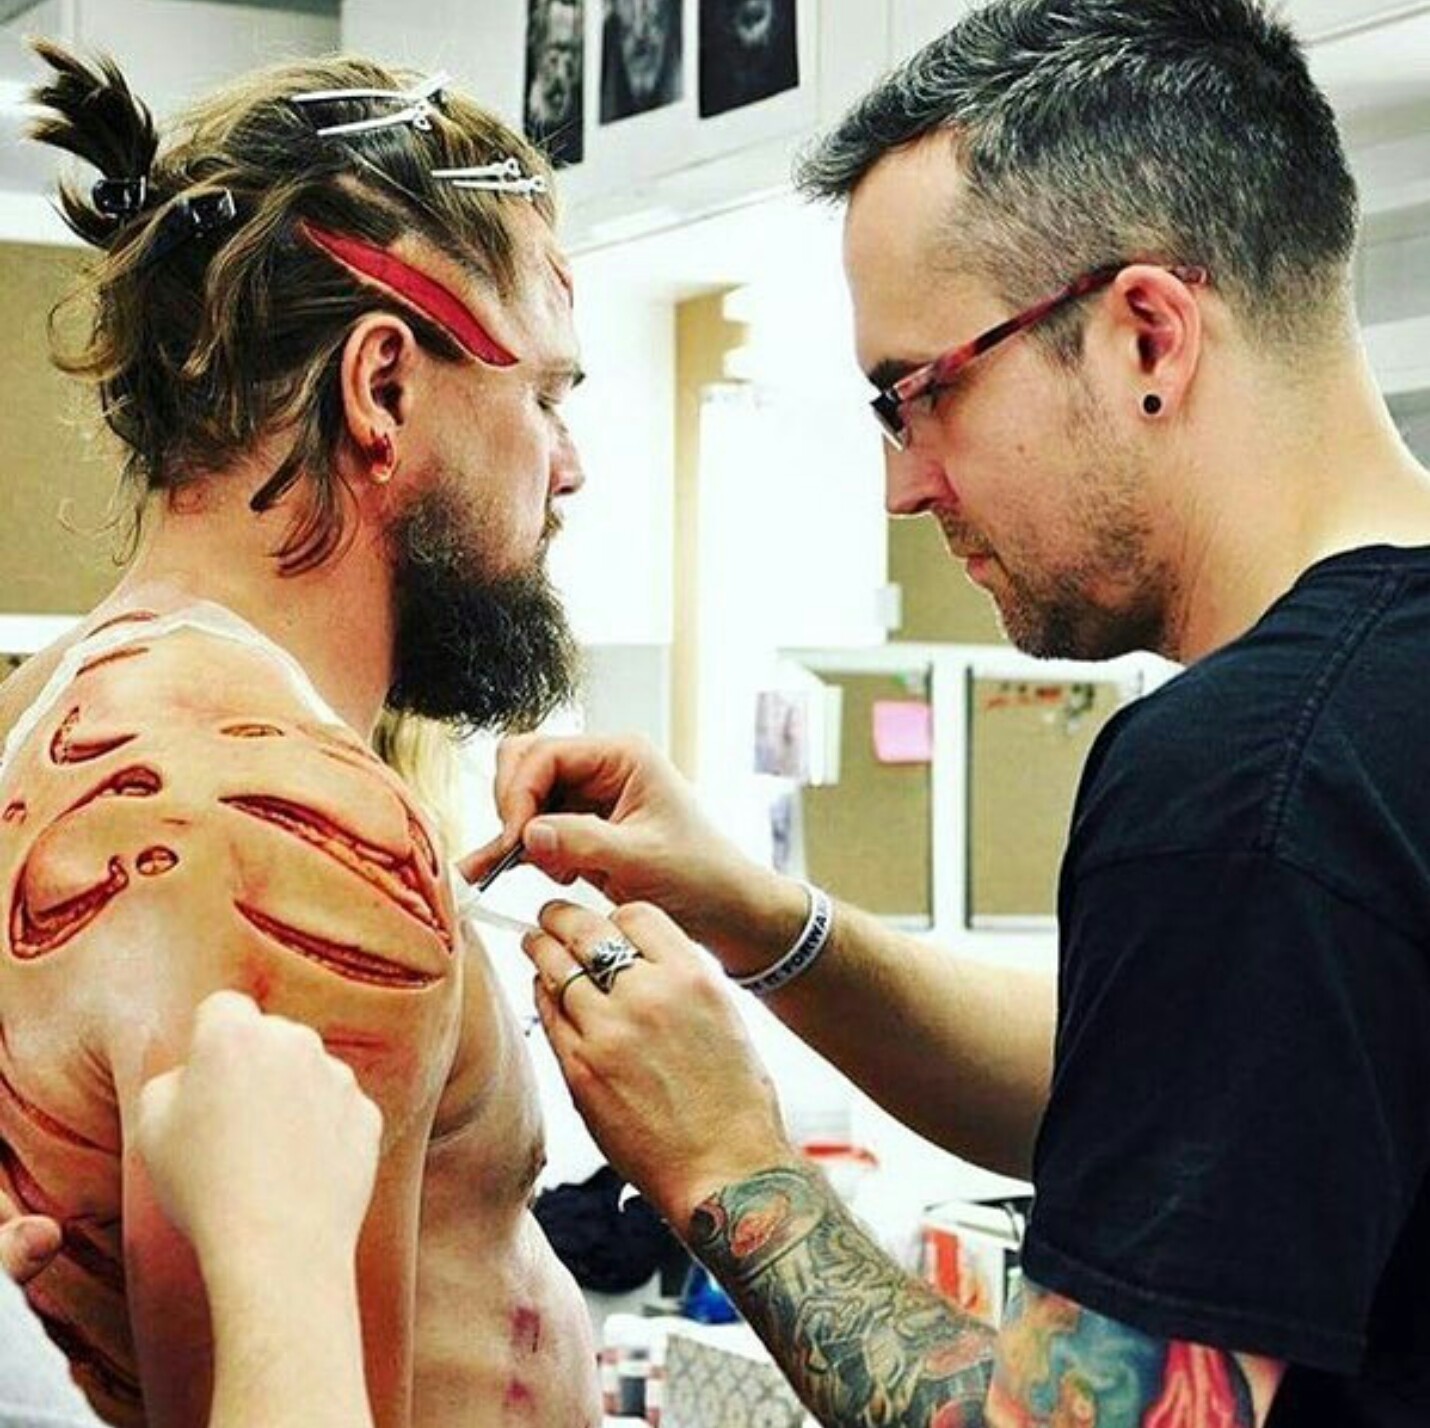 Leonardo DiCaprio getting his wounds applied for the Oscar nominated film, The Revenant.